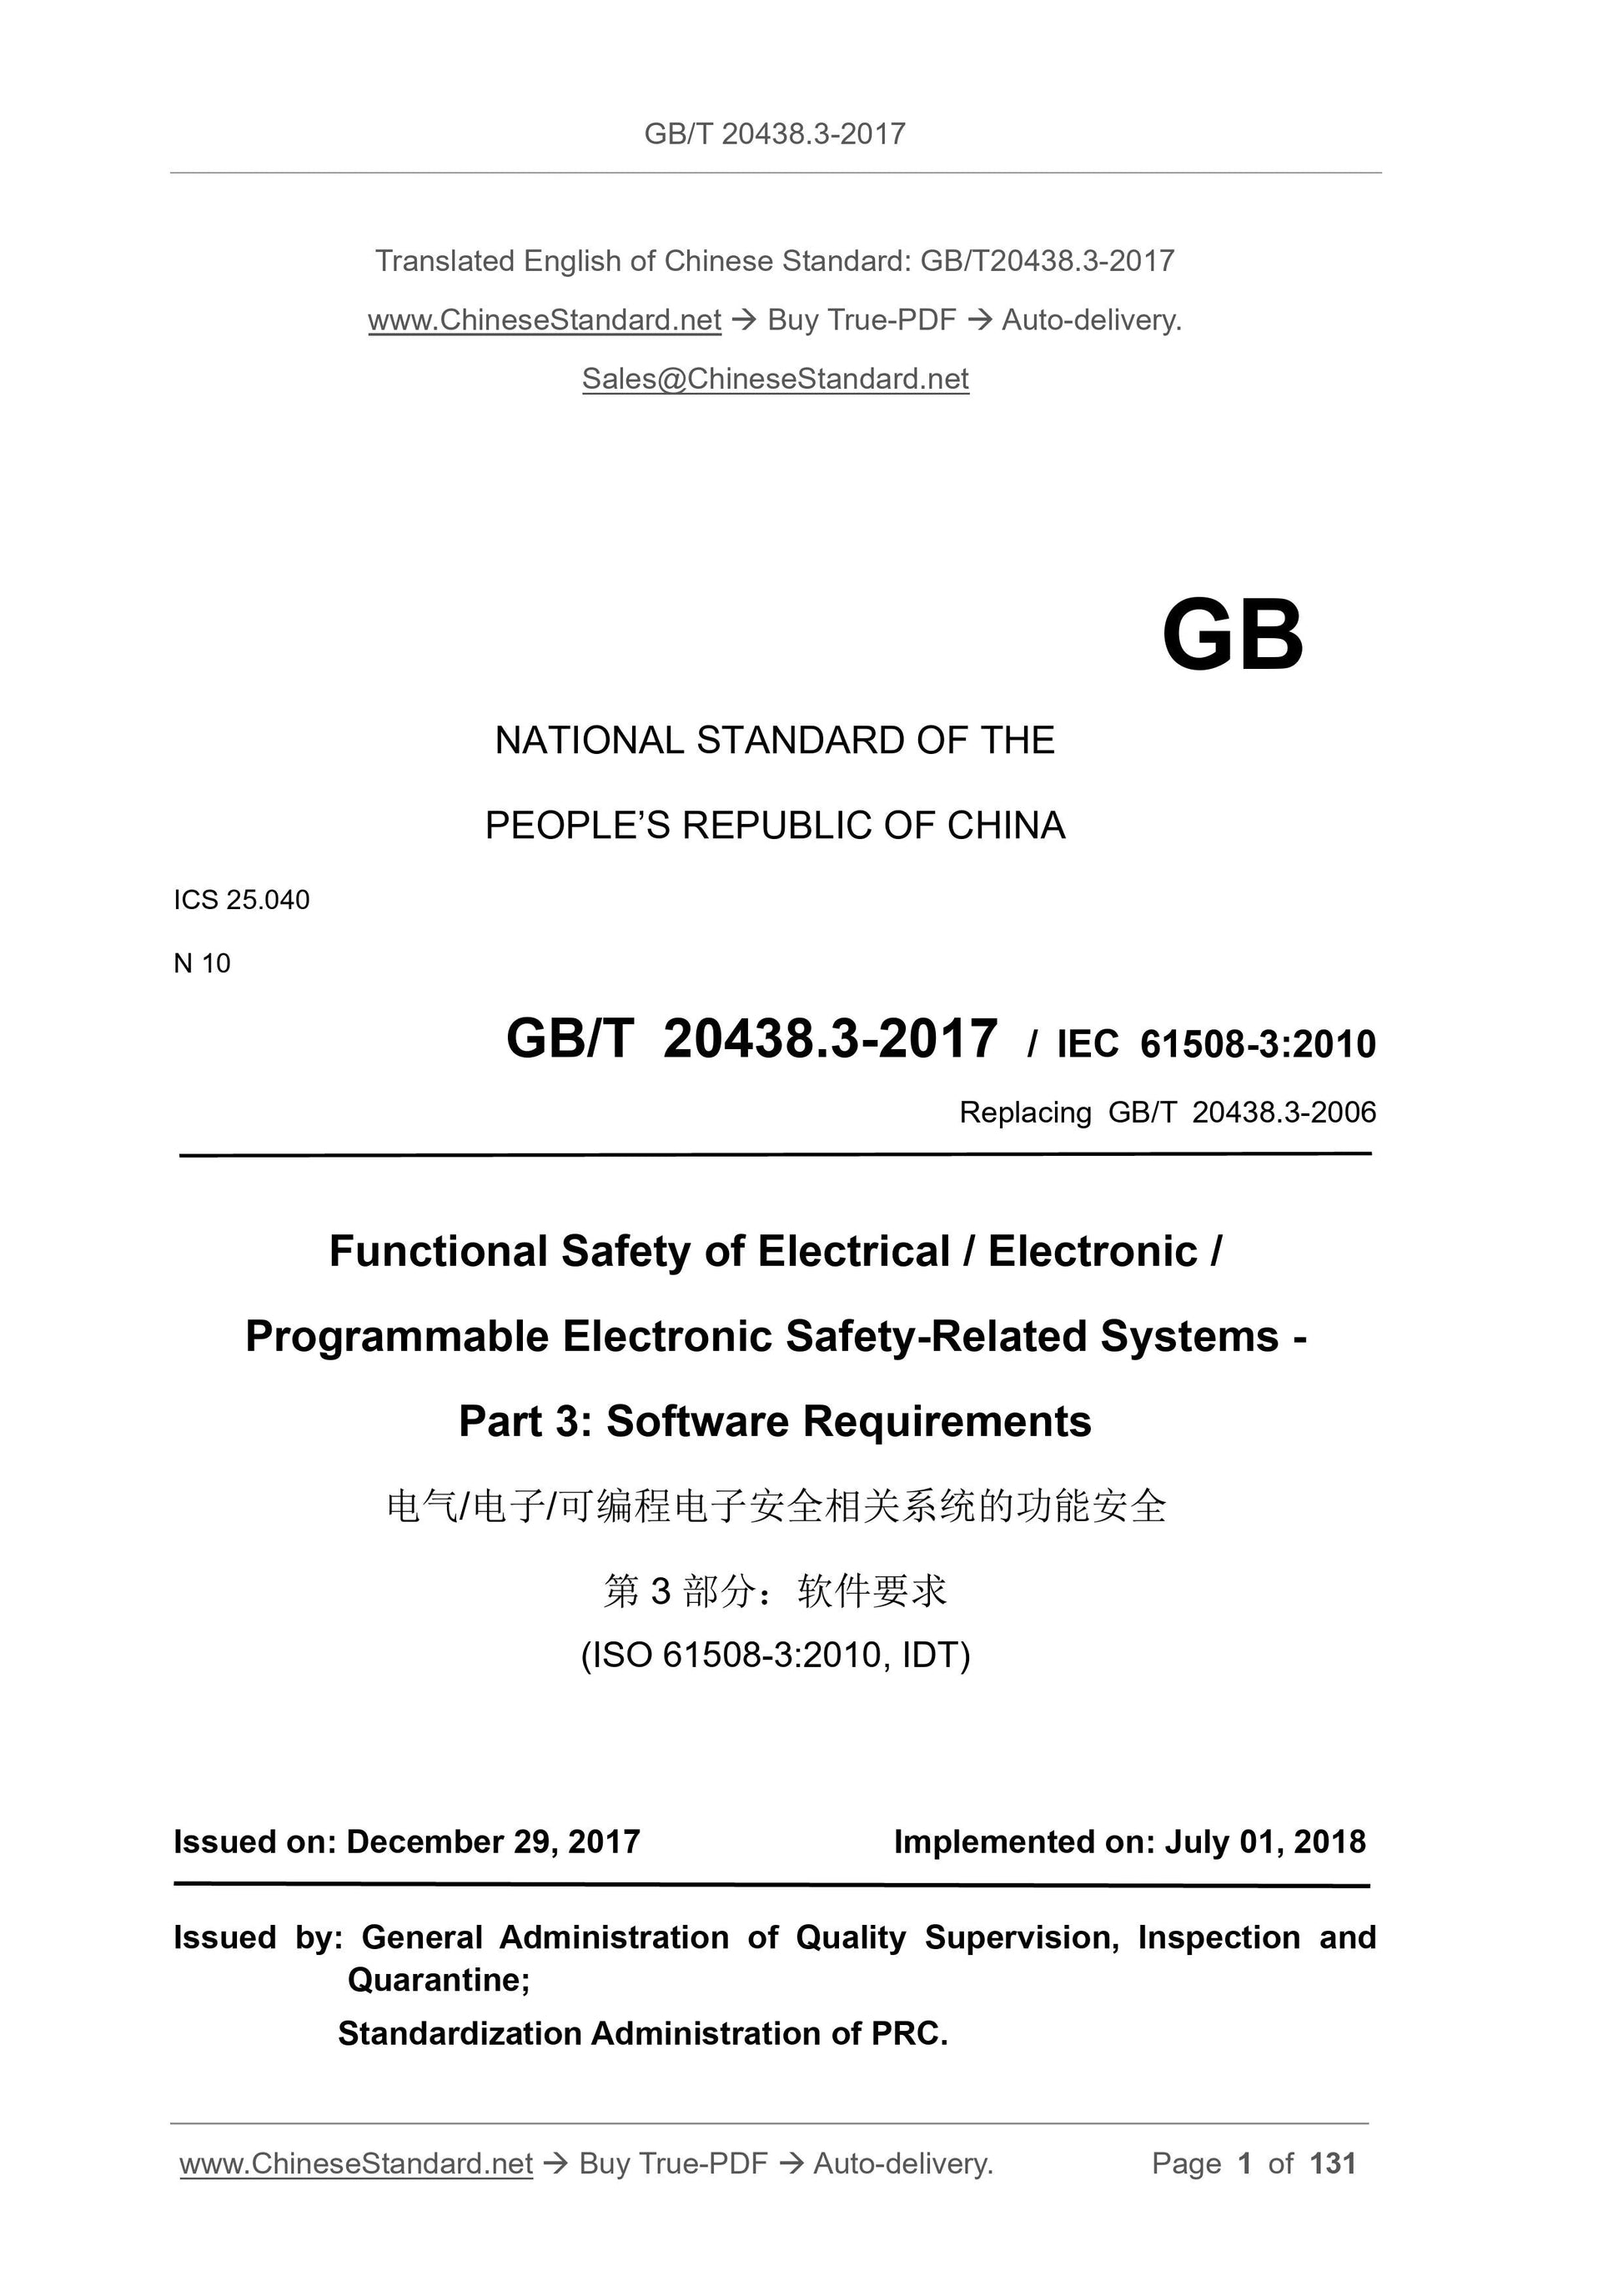 GB/T 20438.3-2017 Page 1